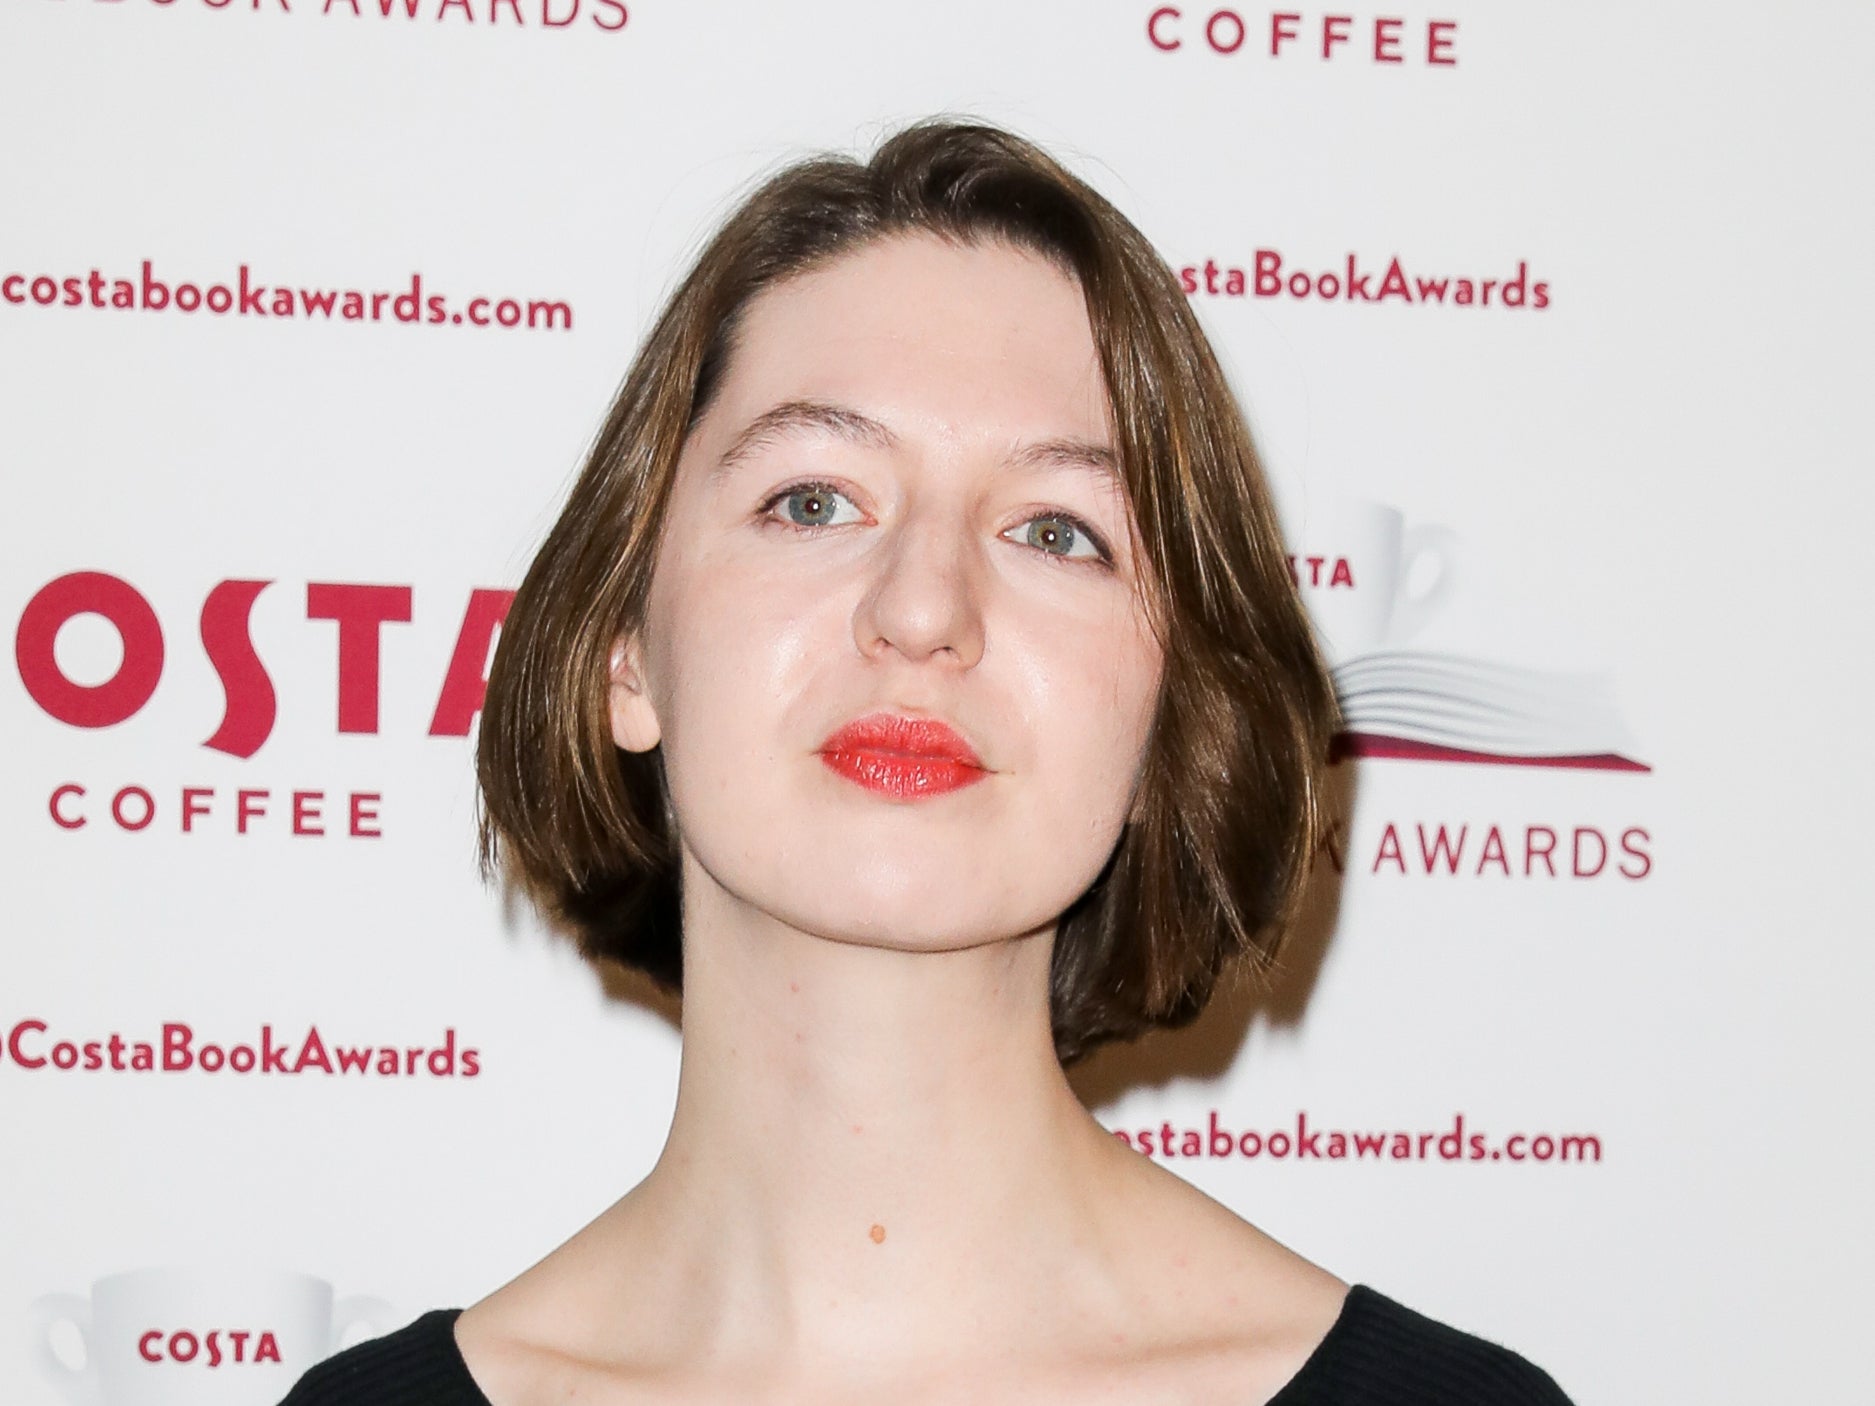 Sally Rooney photographed at the Costa Book Awards in 2019